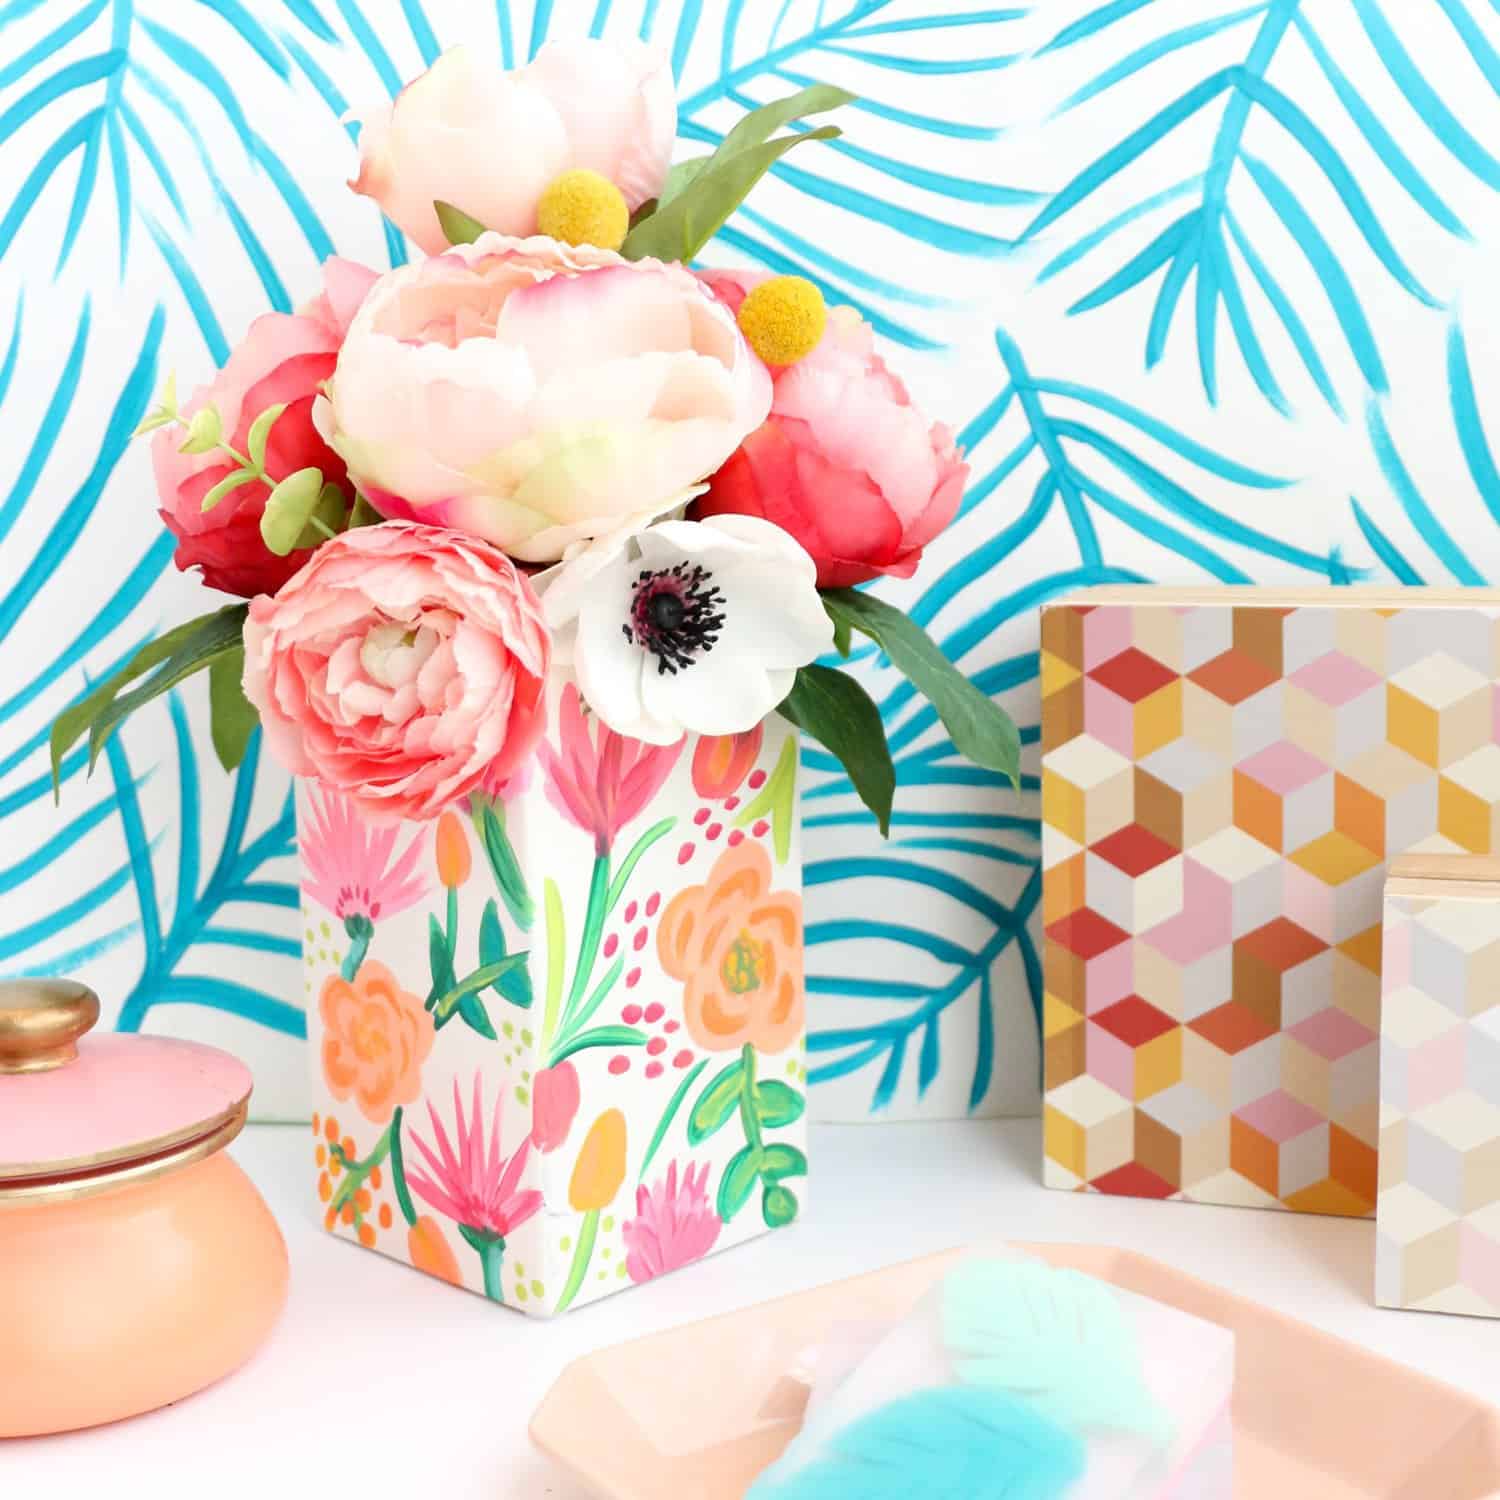 Paint-Your-Own-Pattern-on-Pattern-Floral-Vase-click-through-for-tutorial-2